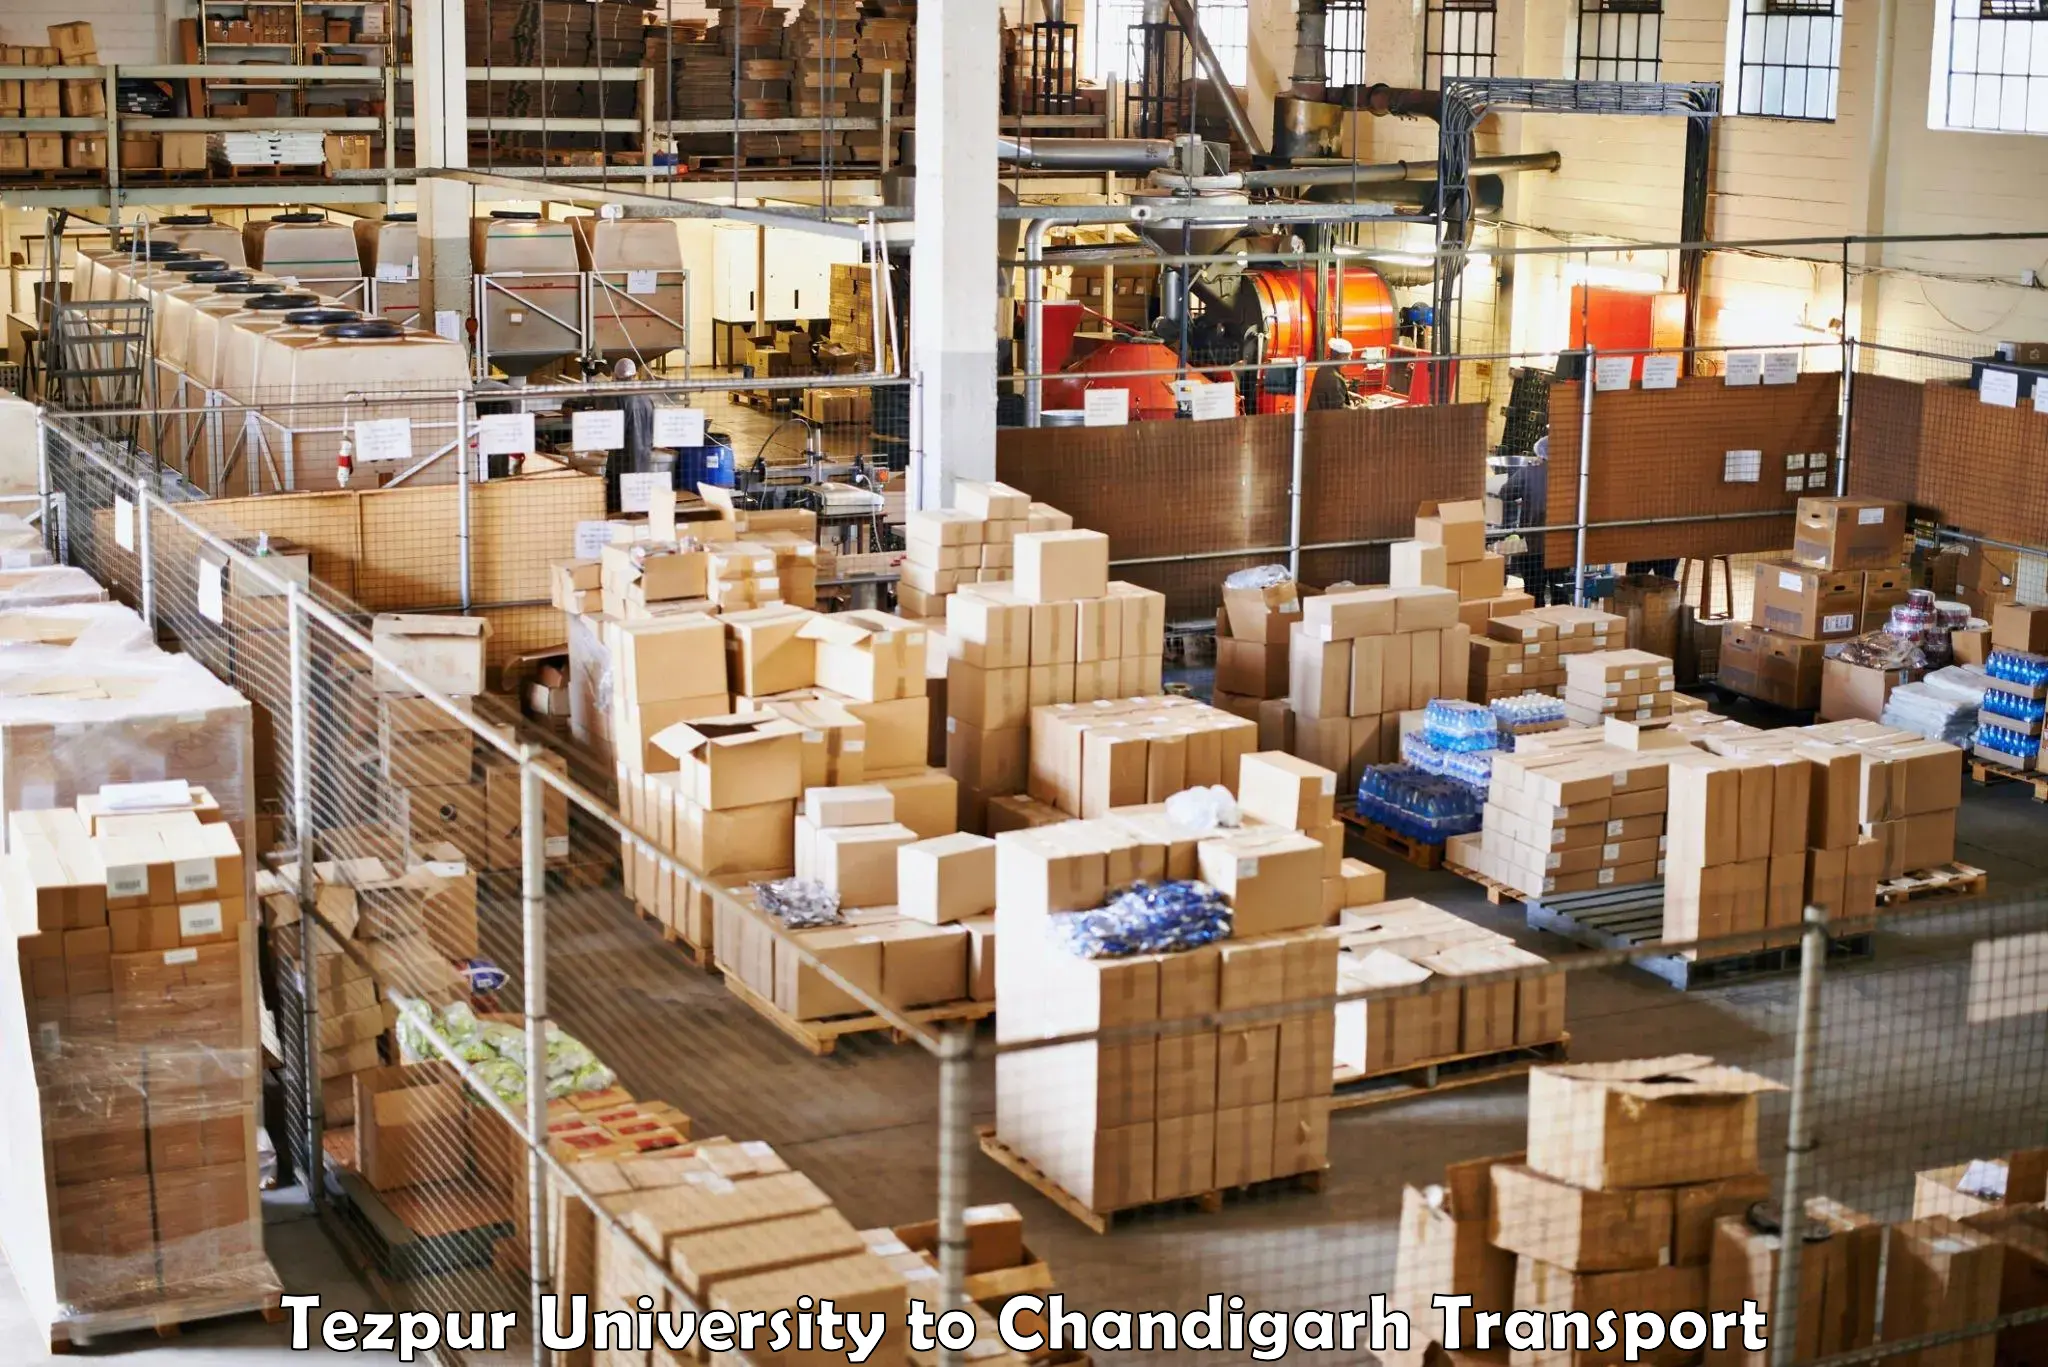 Goods delivery service Tezpur University to Chandigarh